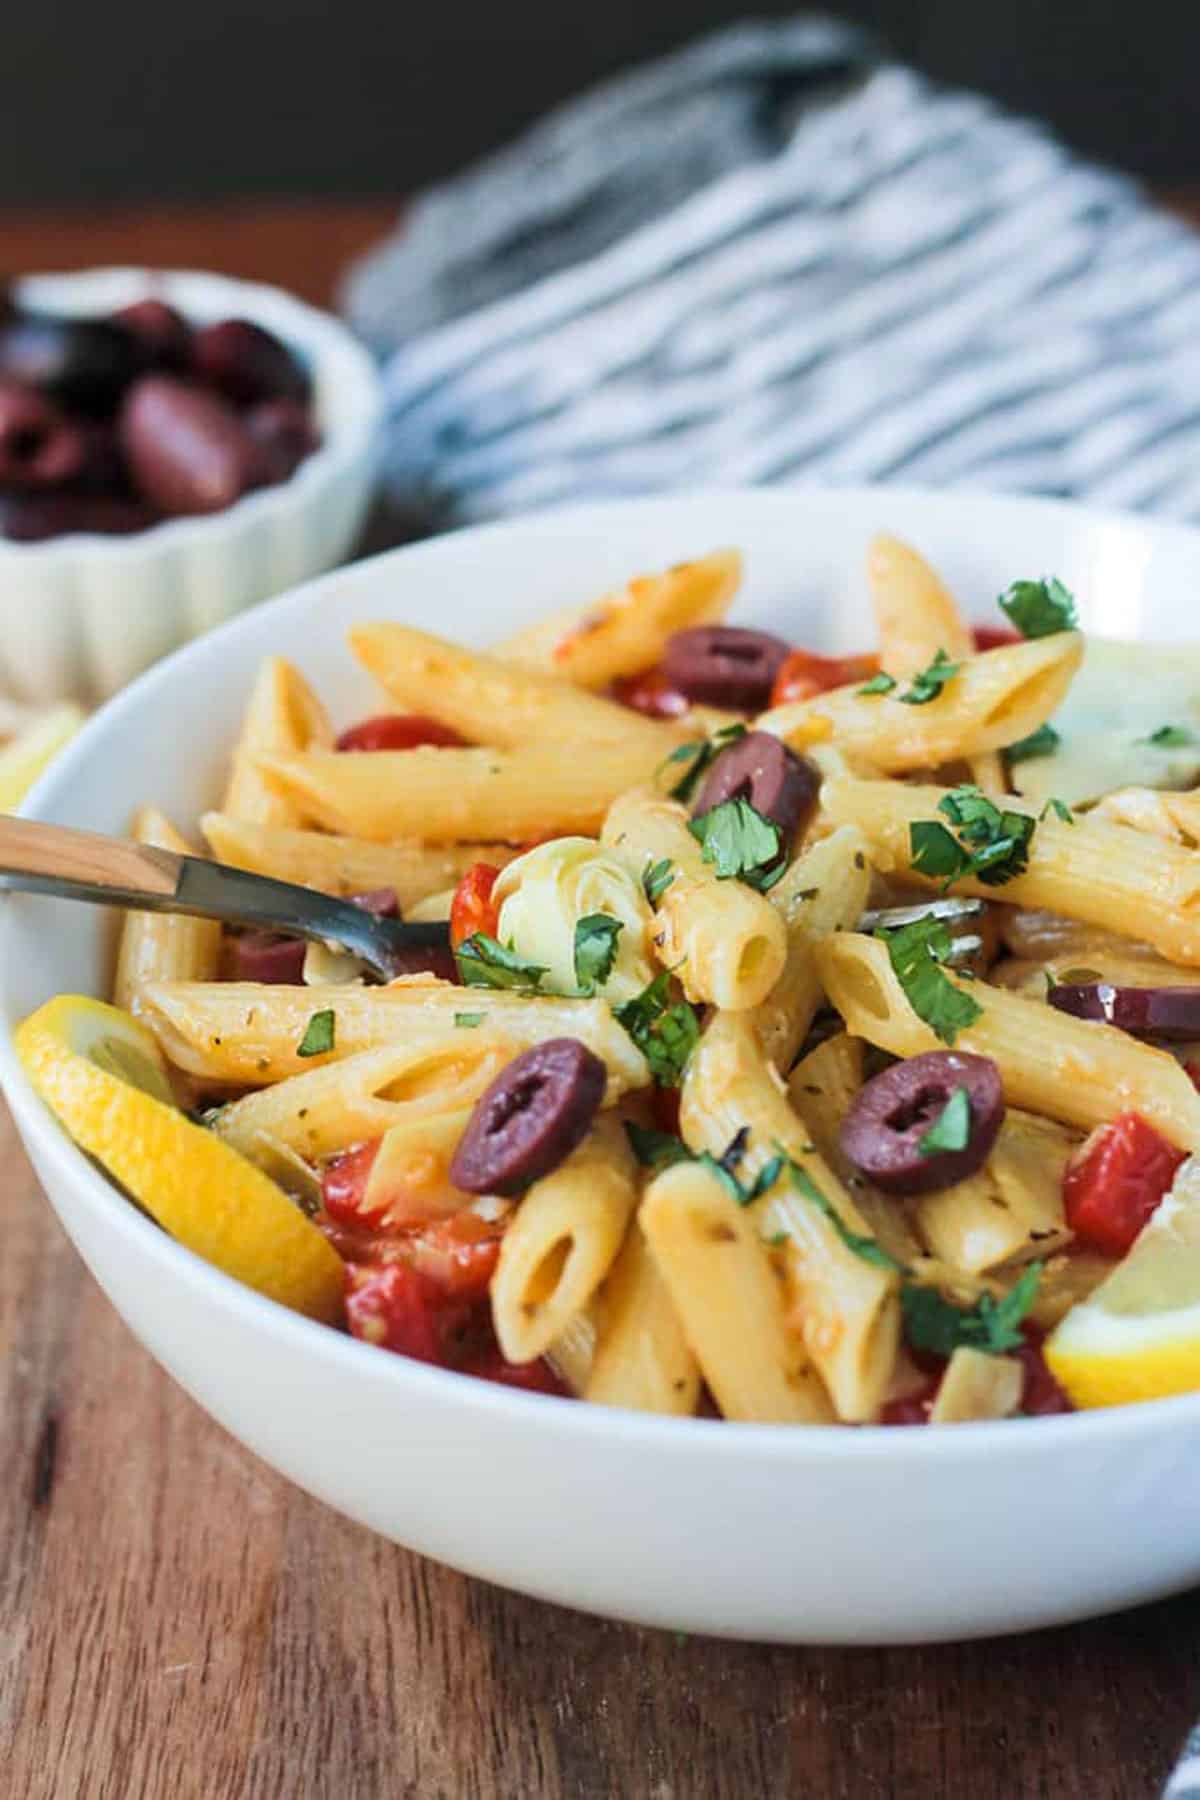 Penne pasta with artichokes, red peppers, and olives in a white bowl.